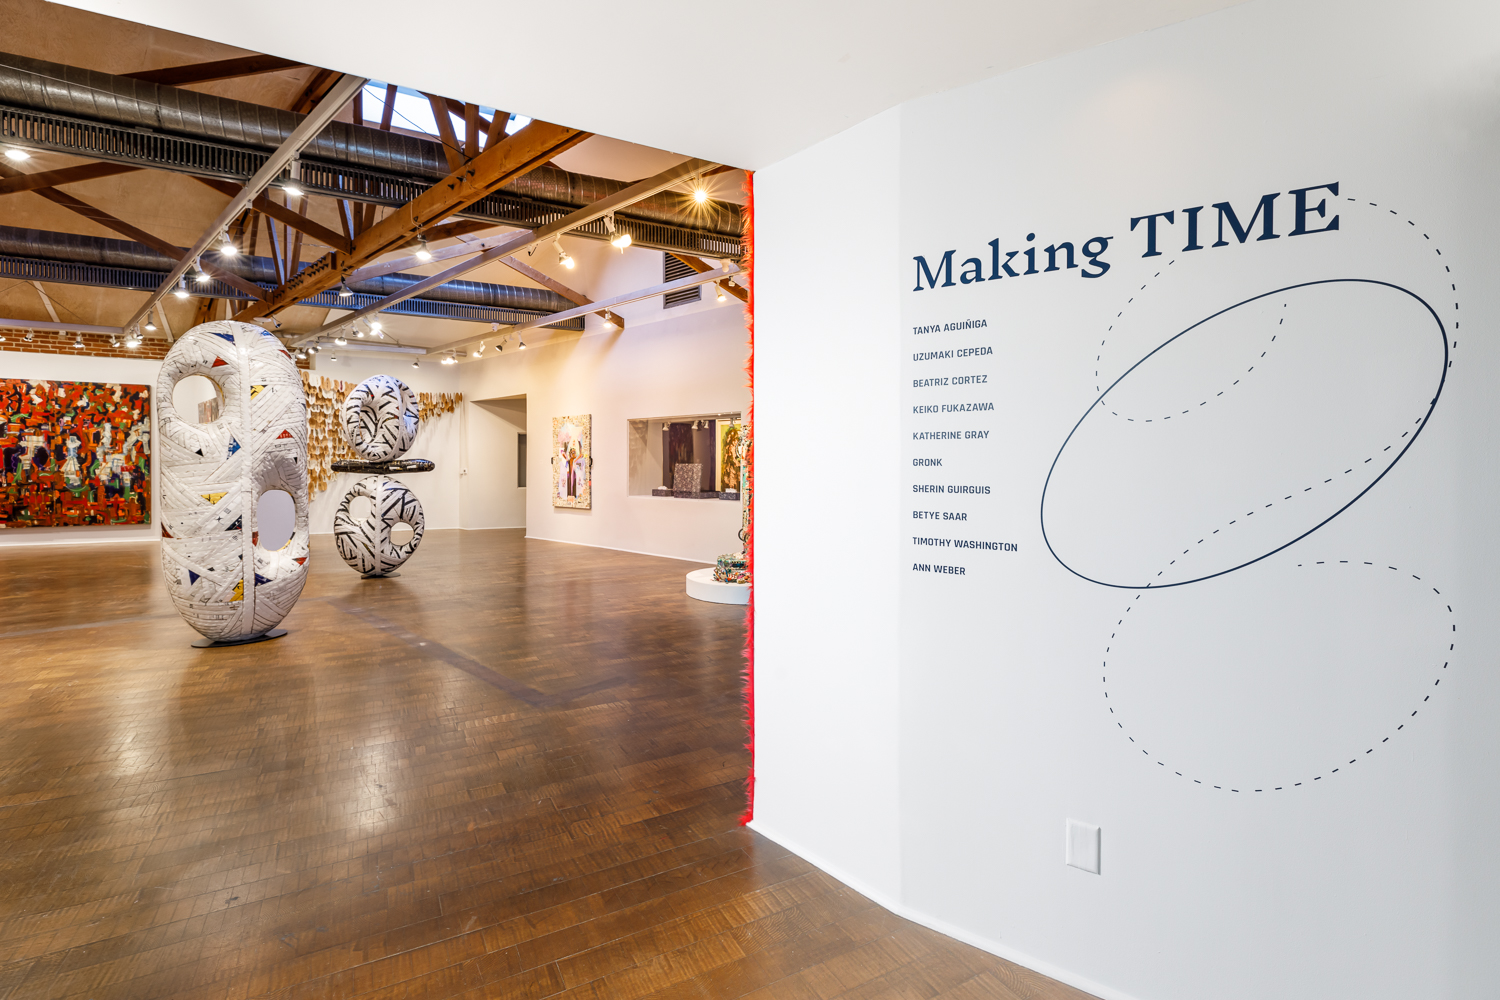 Making Time, installation view, 2021. Photo: Marc Walker/Dollhouse.